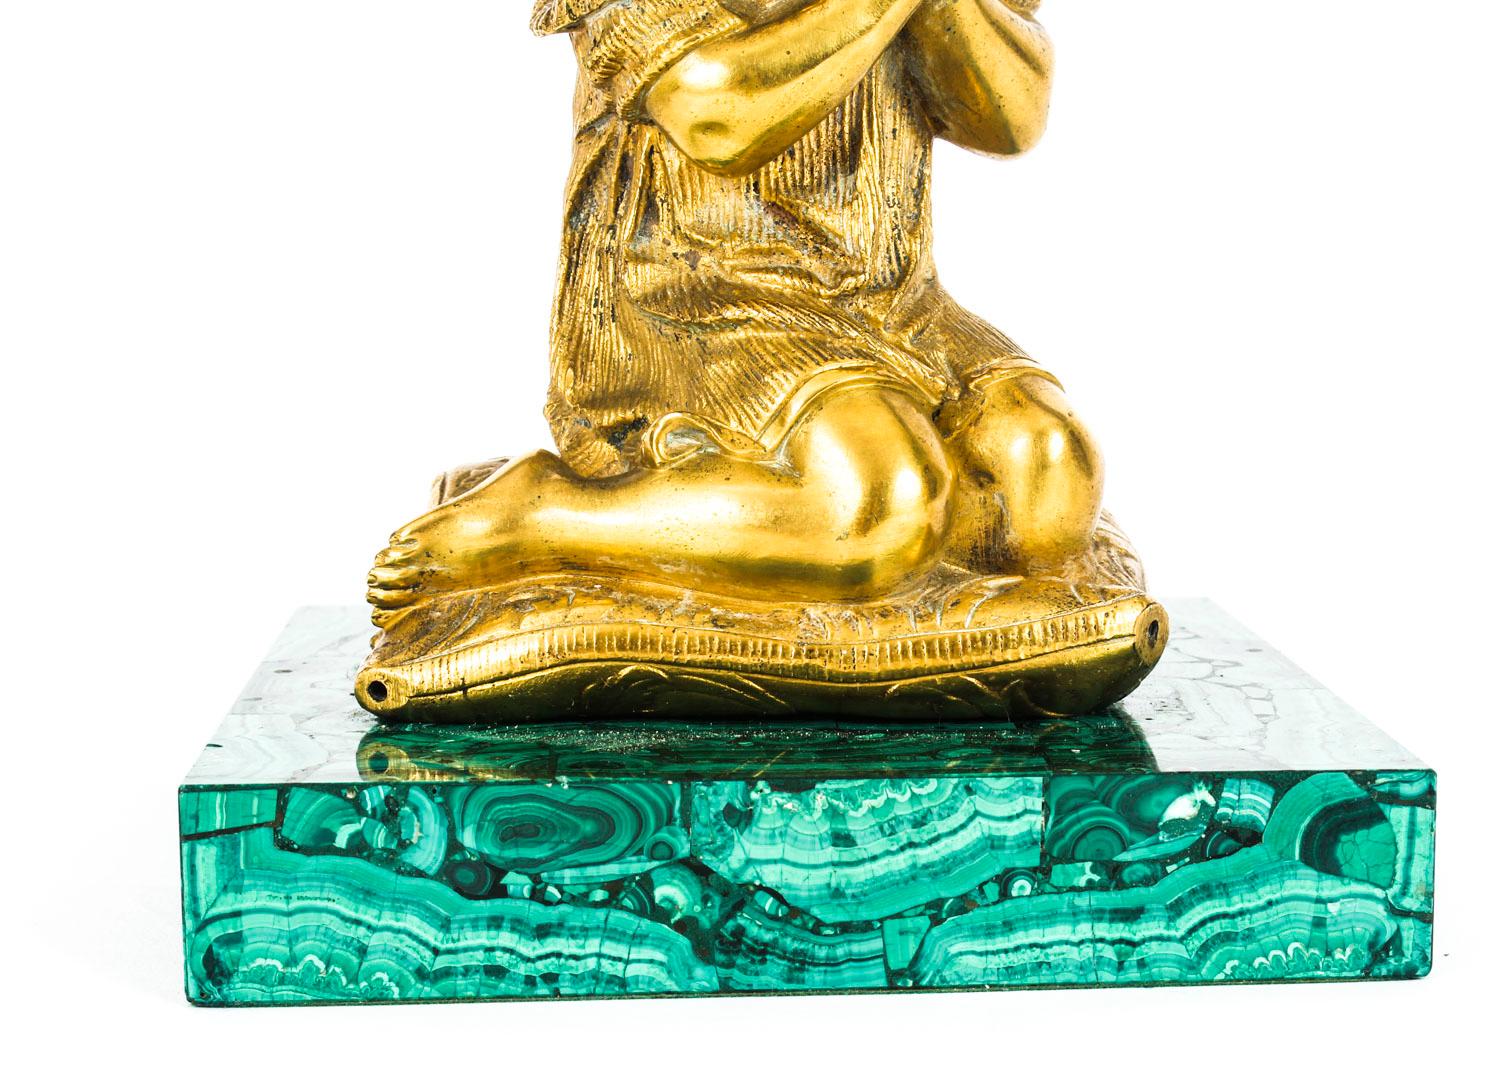 Late 19th Century French Malachite and Ormolu-Mounted Sculpture of a Girl Praying, 19th Century